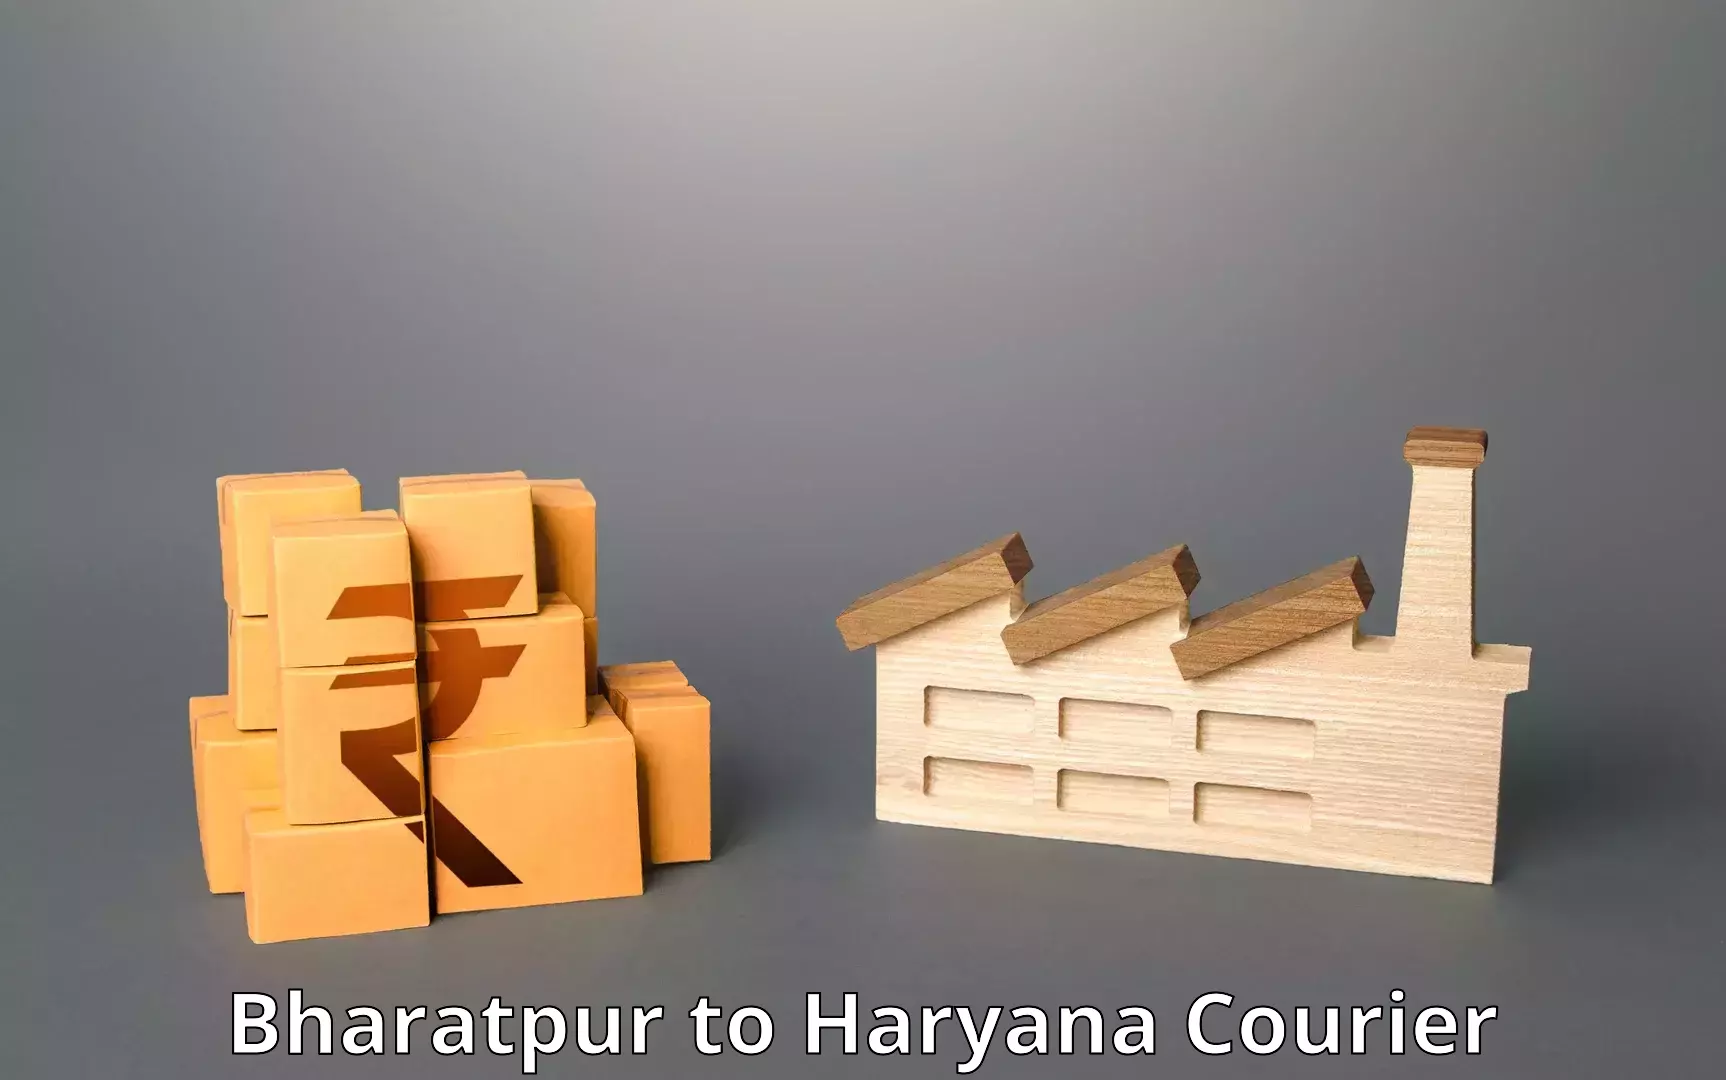 Multi-national courier services Bharatpur to NCR Haryana